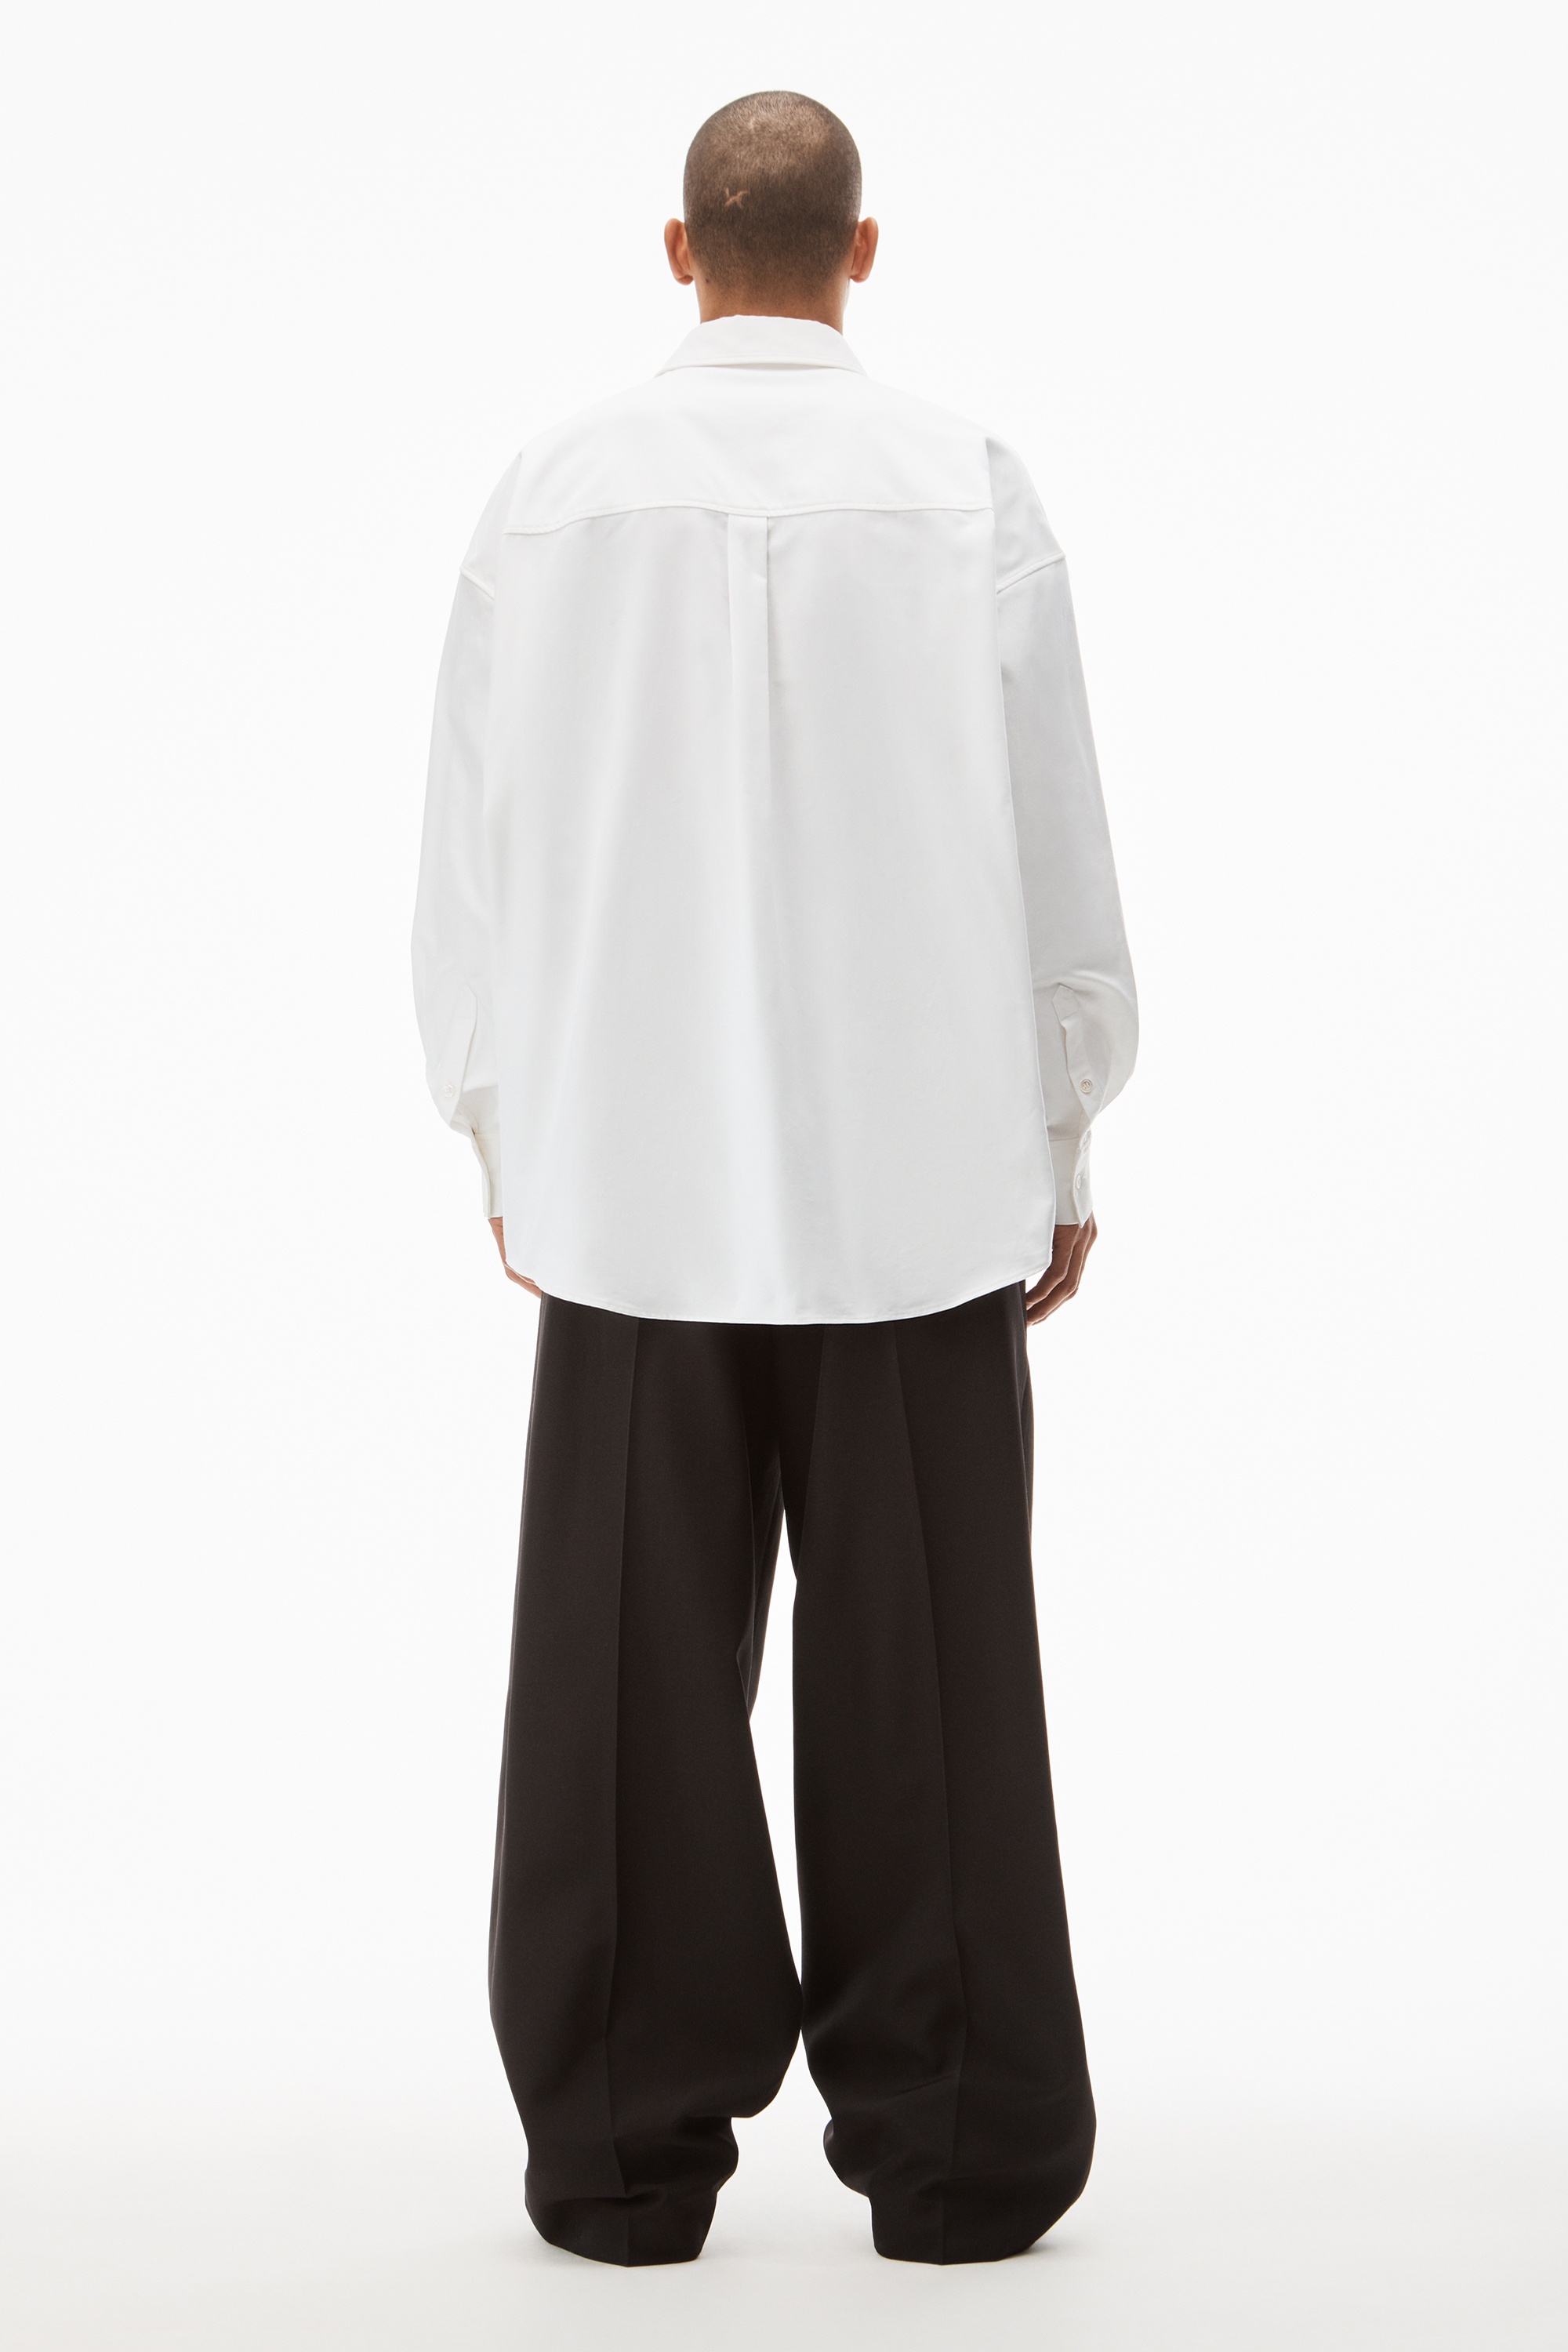 OVERSIZED BUTTON DOWN IN COTTON SHIRTING - 5